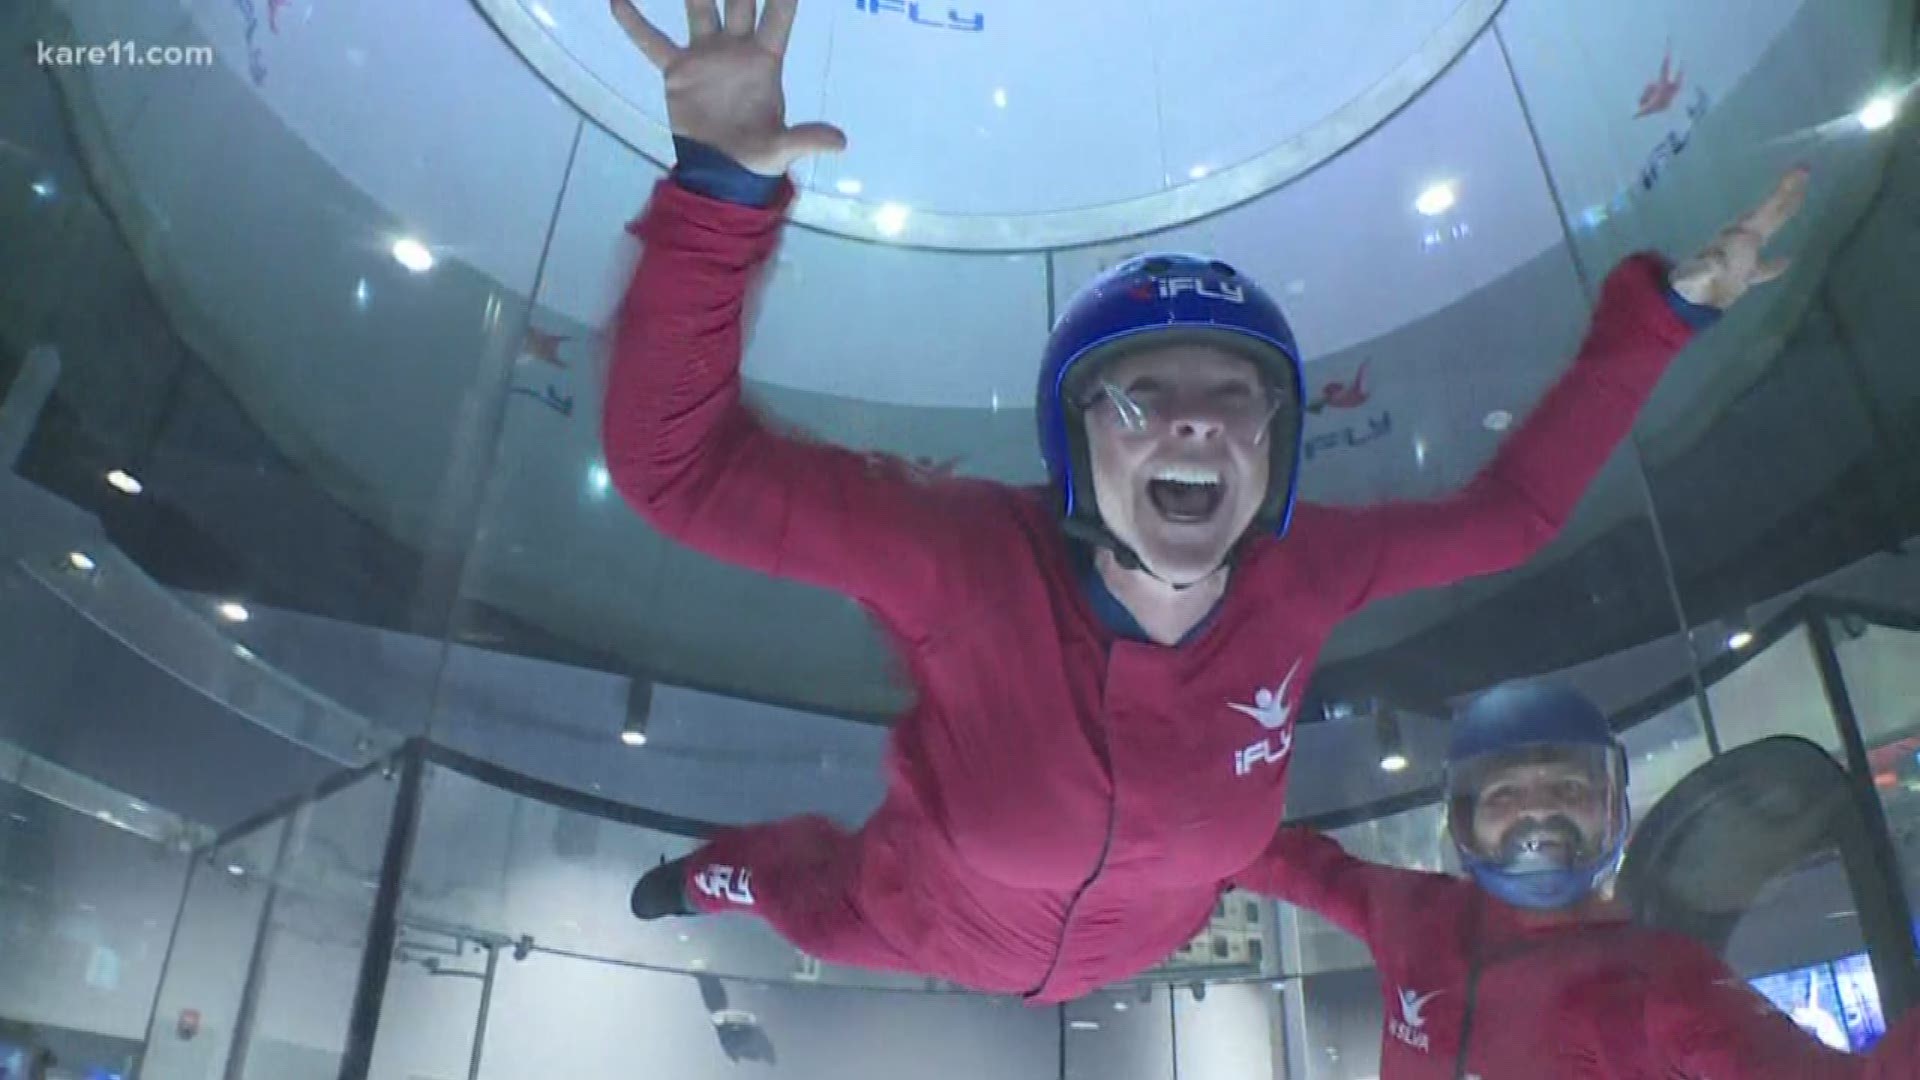 Minnesota gets its first indoor skydiving center